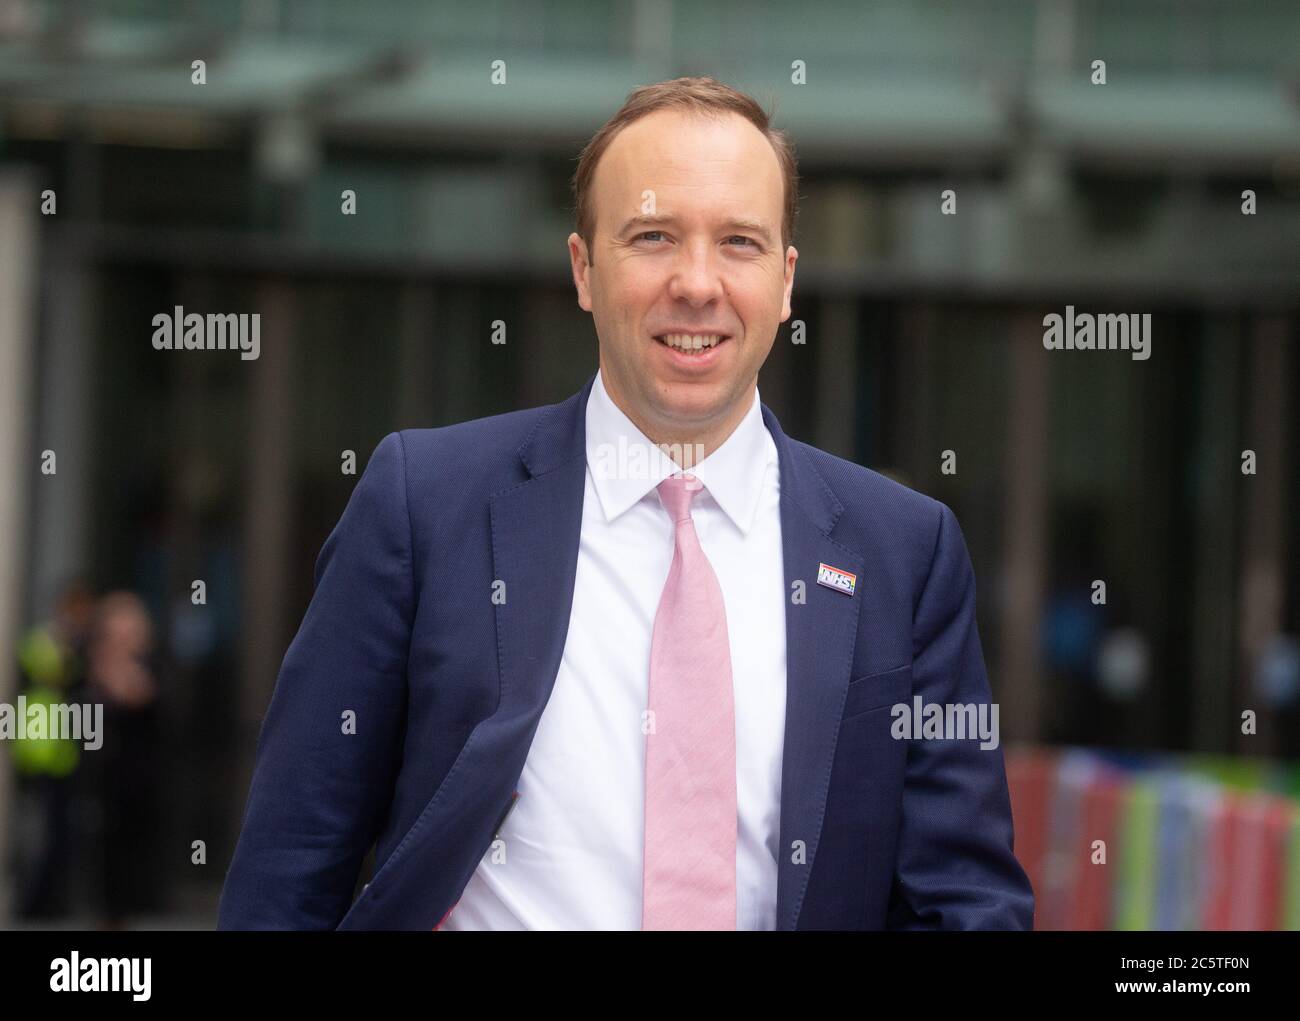 London, UK. 5th July, 2020. Matt Hancock, Secretary of State for Health and Social Care, arrives for the 'The Andrew Marr Show'. Credit: Tommy London/Alamy Live News Stock Photo